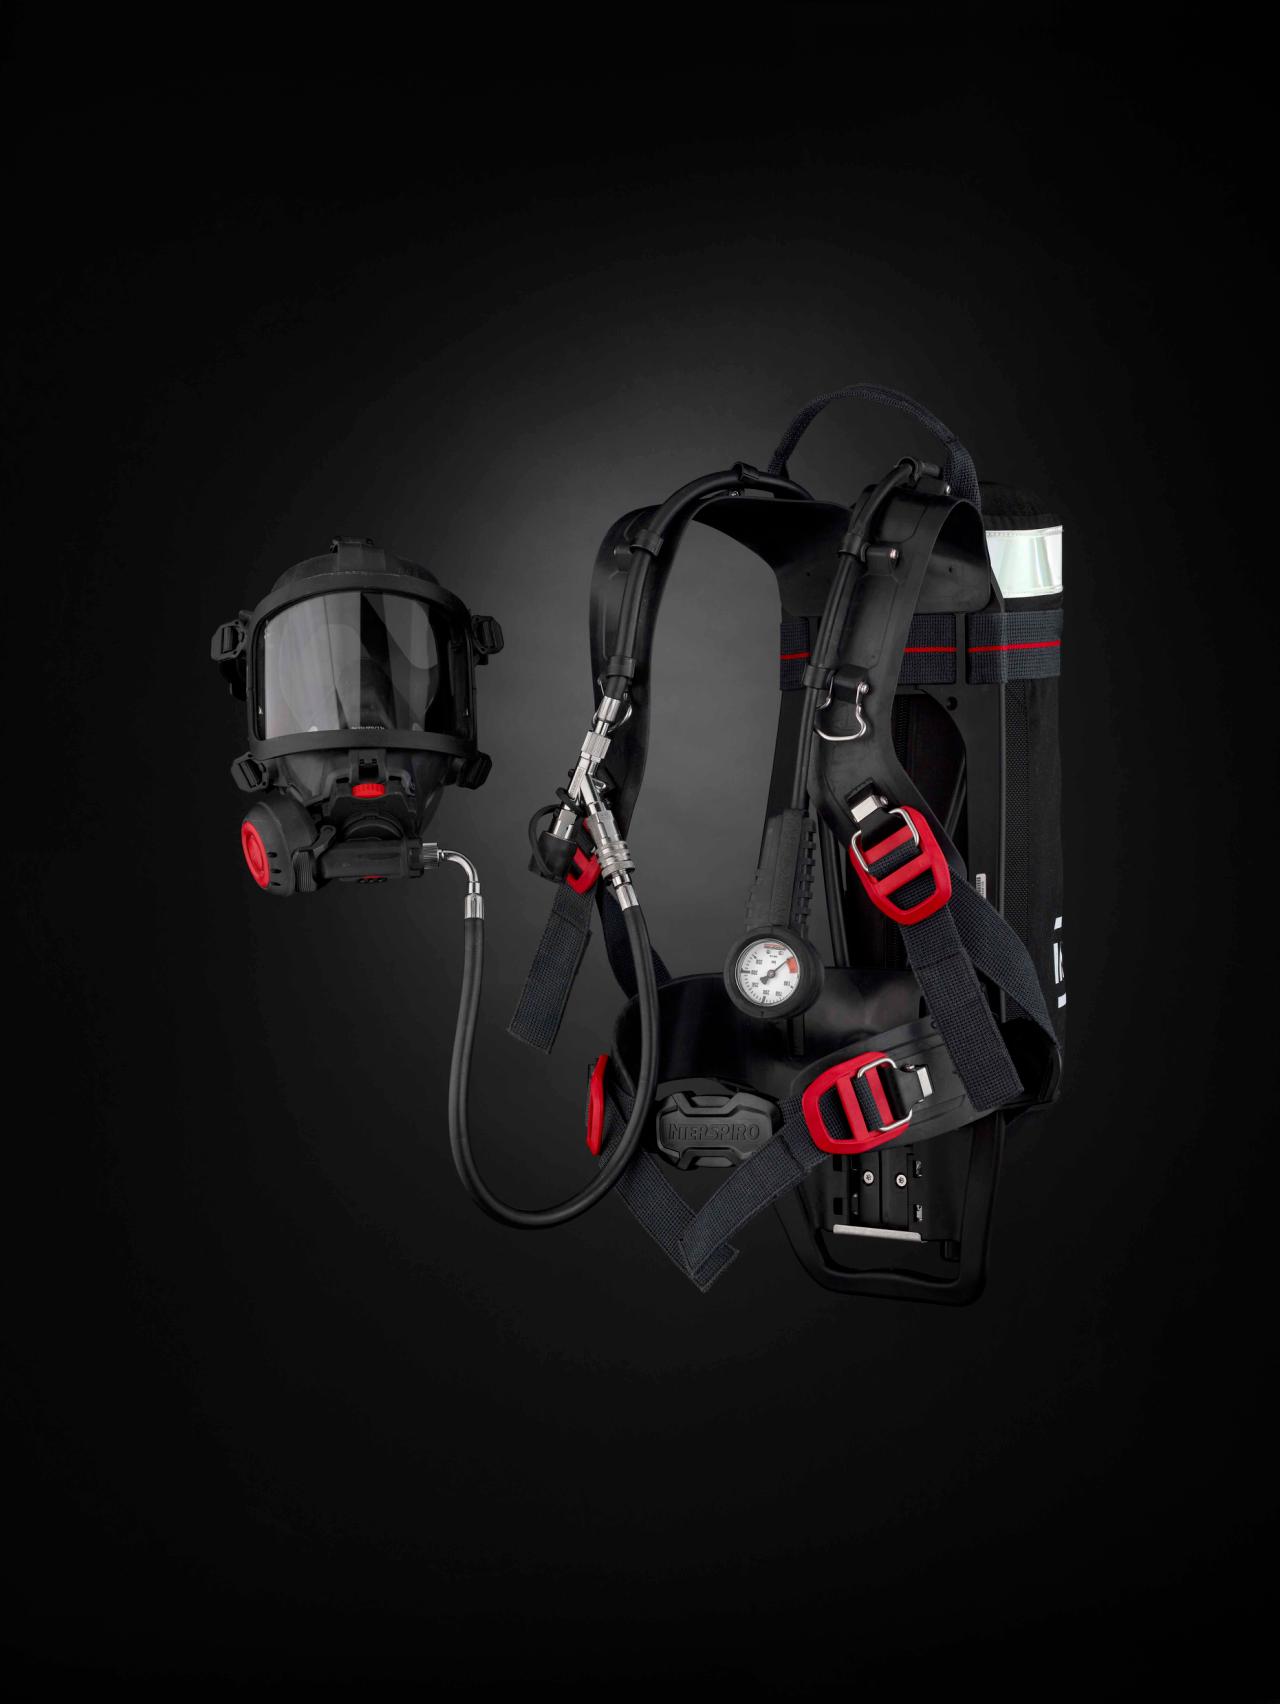 Presentational product images - Respire Incurve SCBA